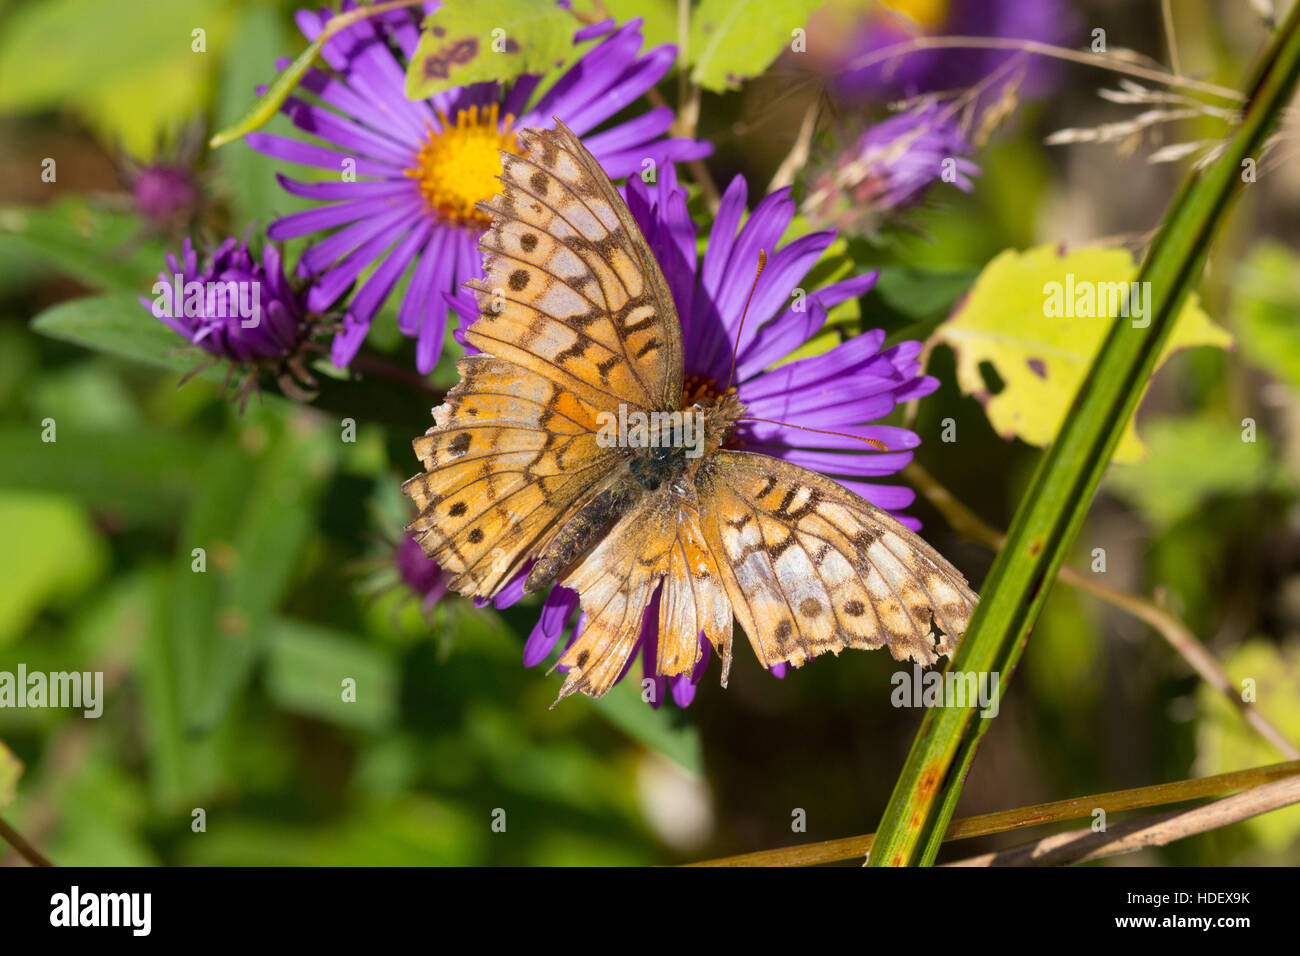 A worn Variegated Fritillary butterfly (Euptoieta claudia) nectaring on New England aster flower (Symphyotrichum novae-angliae) Stock Photo